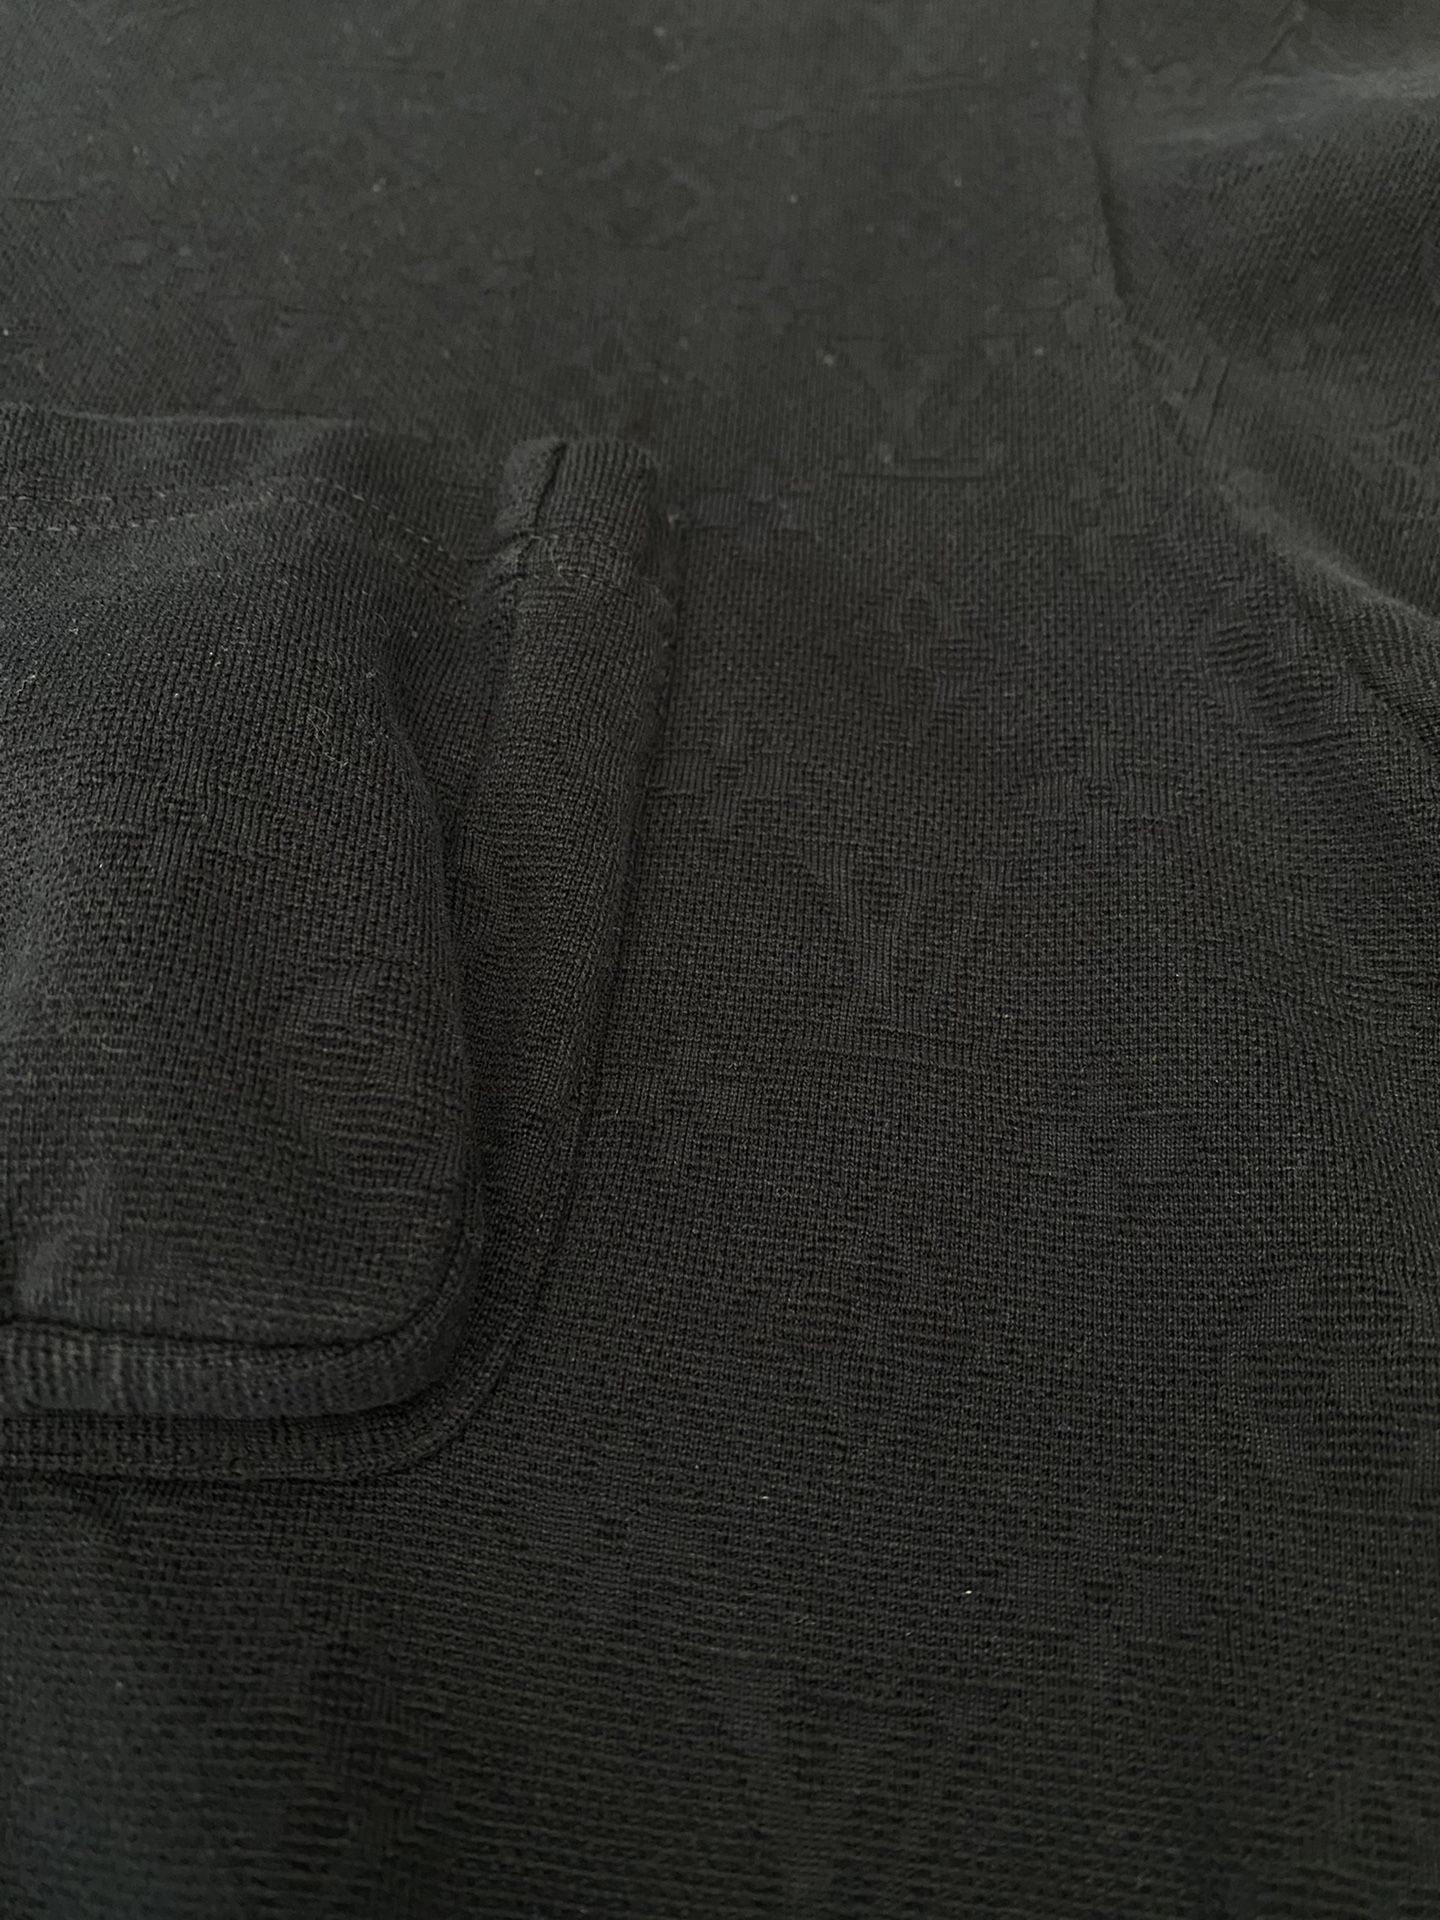 Louis Vuitton 3D Pocket Monogram T-shirt for Sale in Cleveland, OH